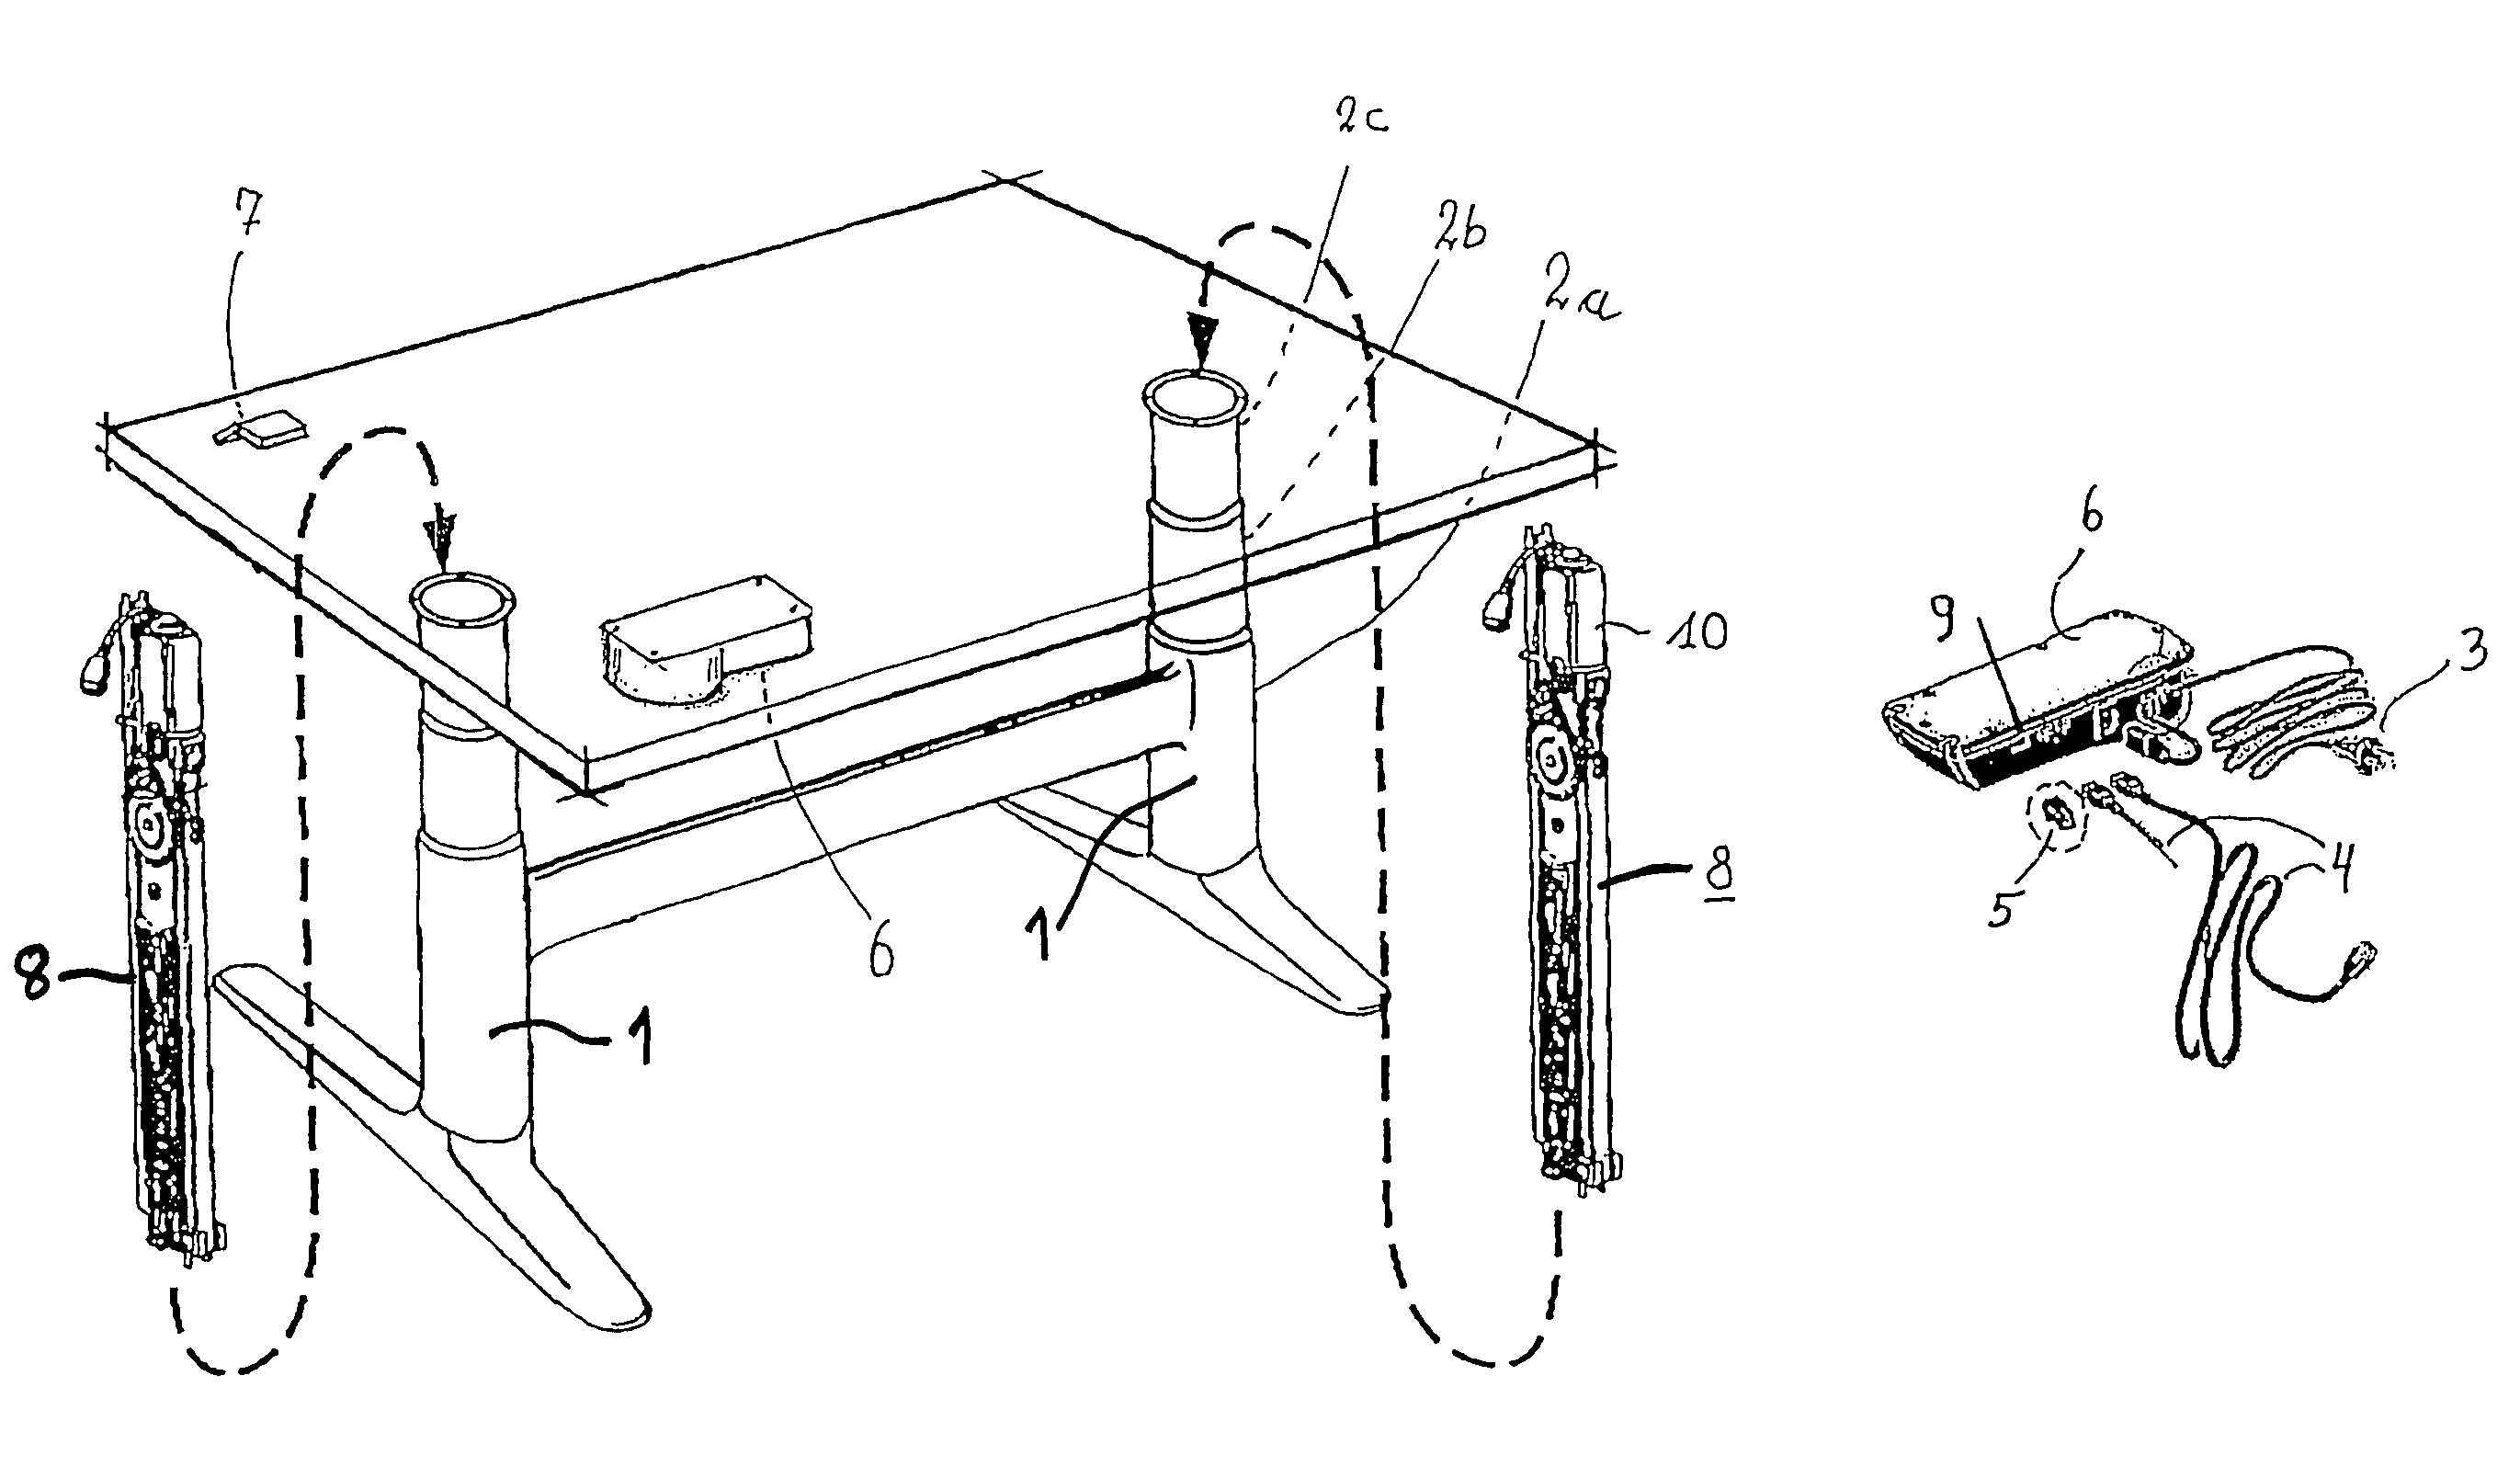 Article of furniture, in particular a sitting/standing table